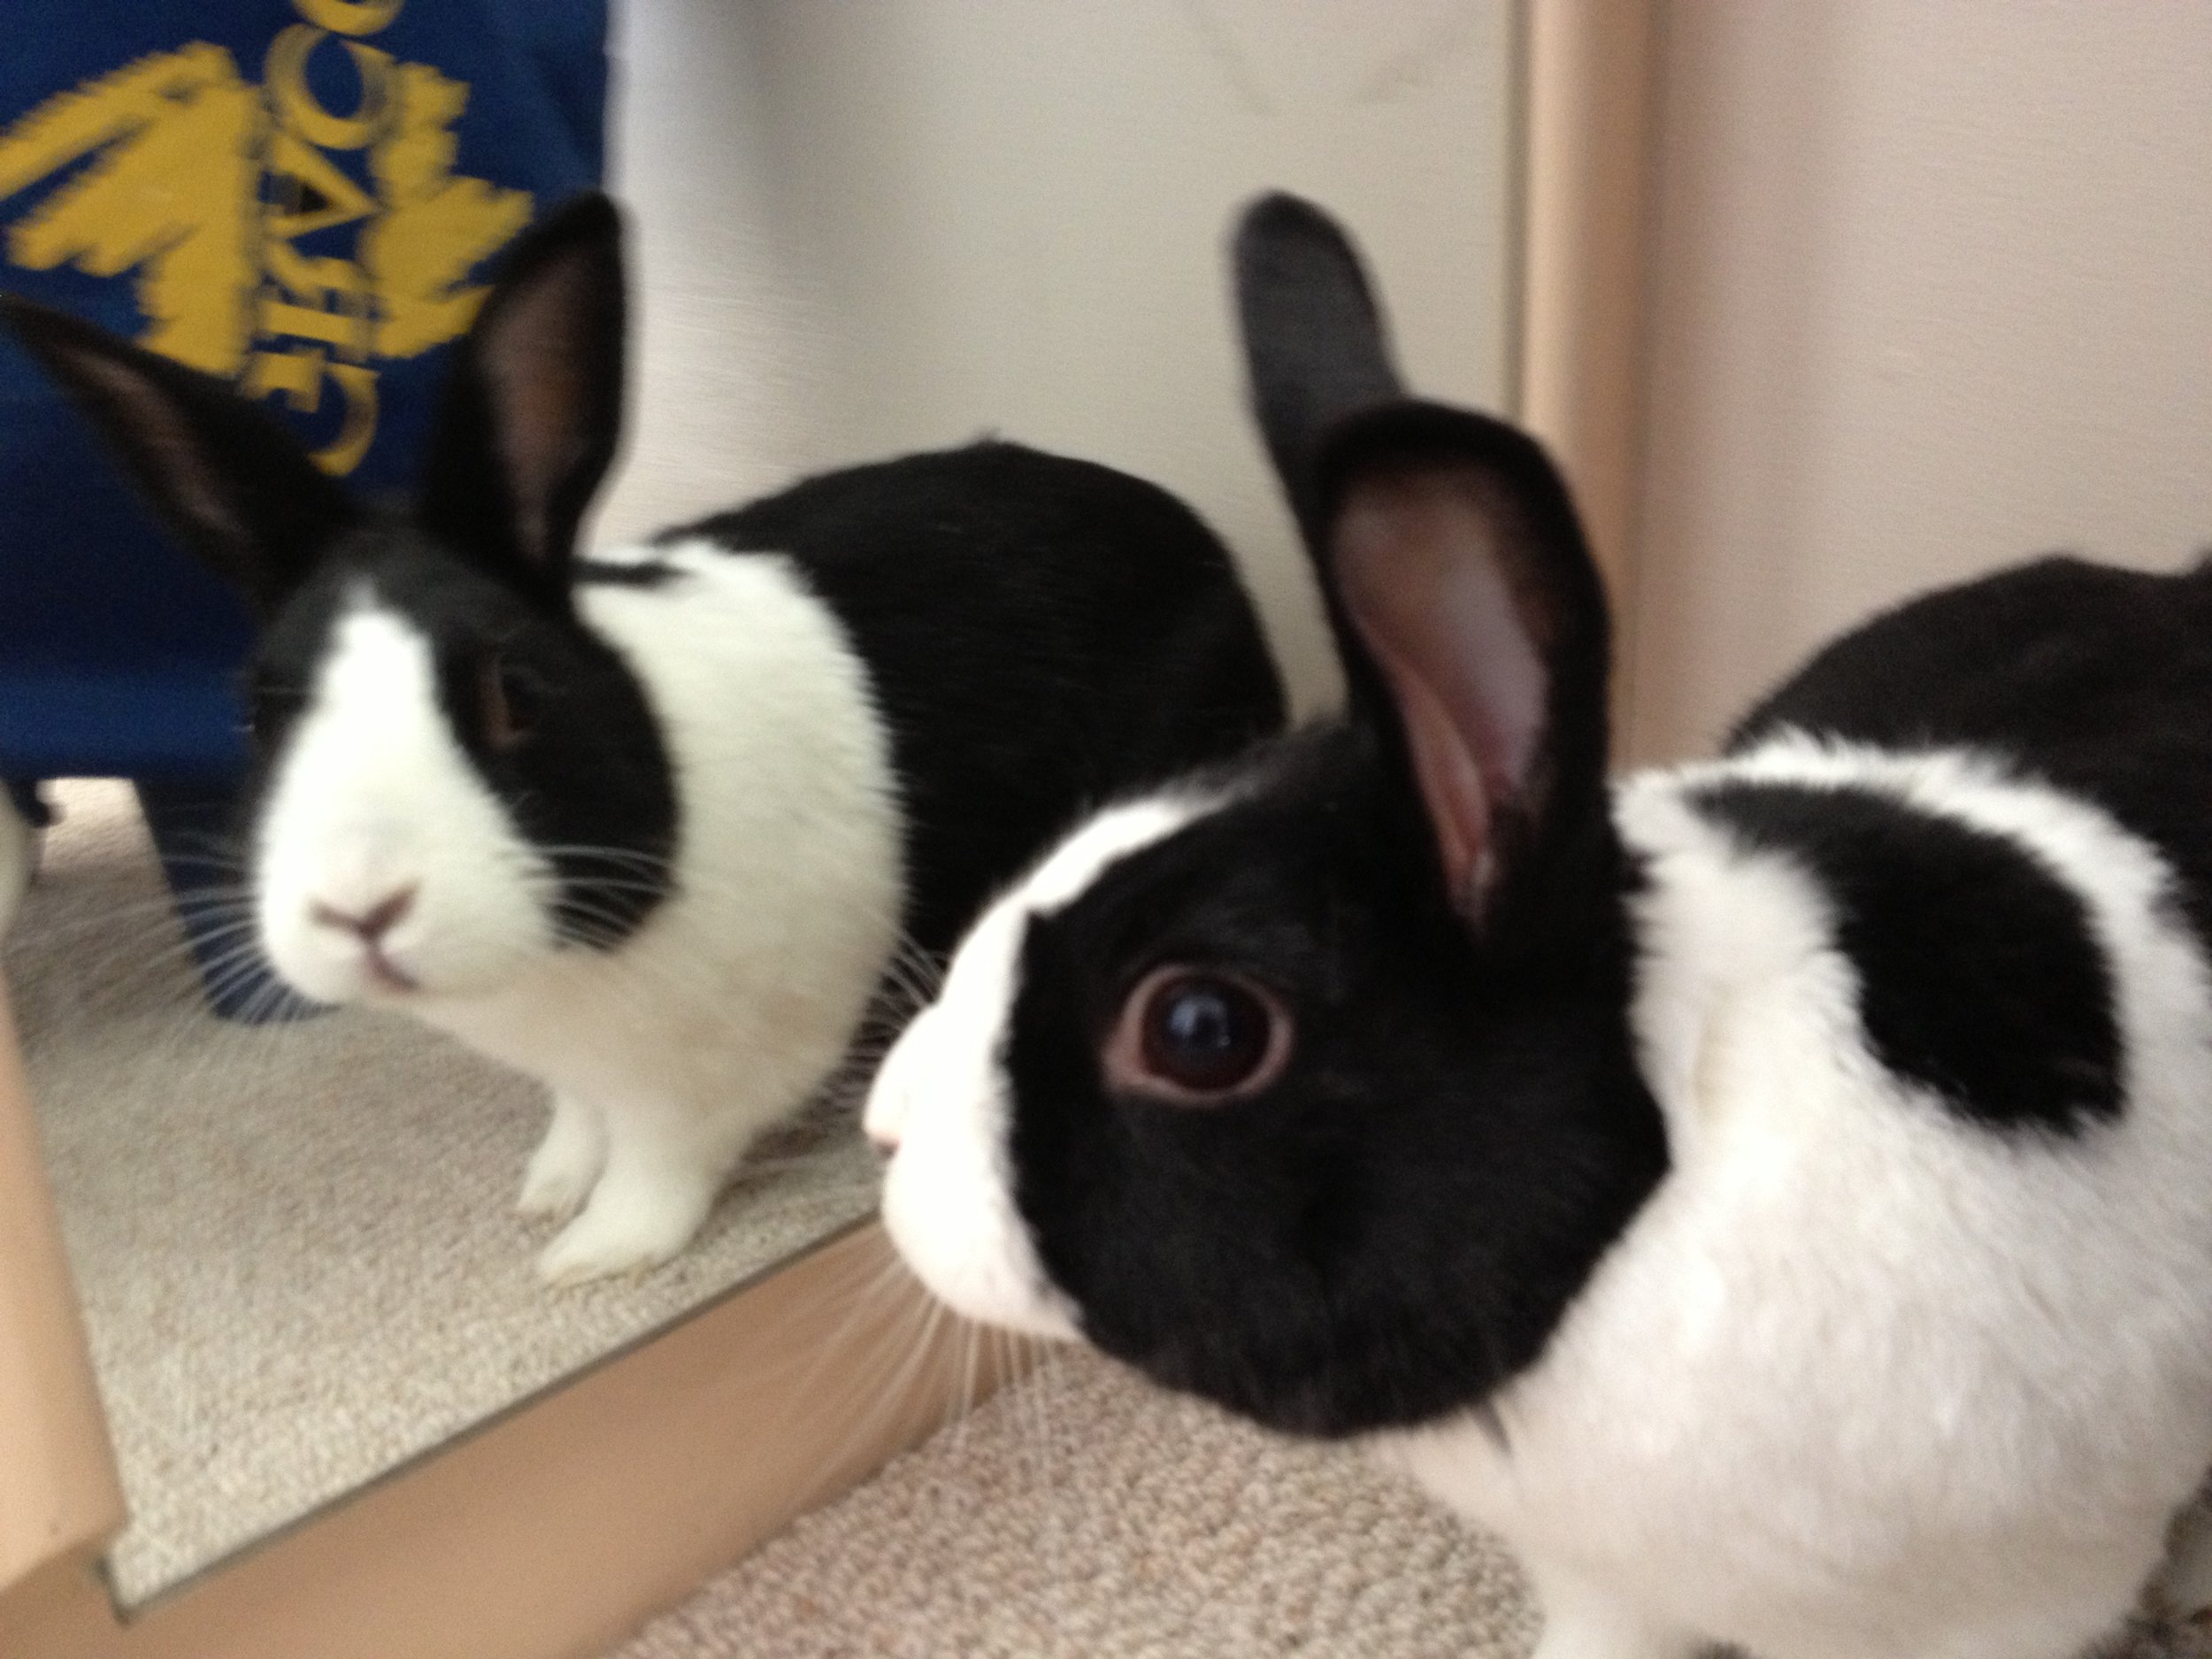 Bunny Is Suddenly Distracted by the Sight of a Very Handsome Bun